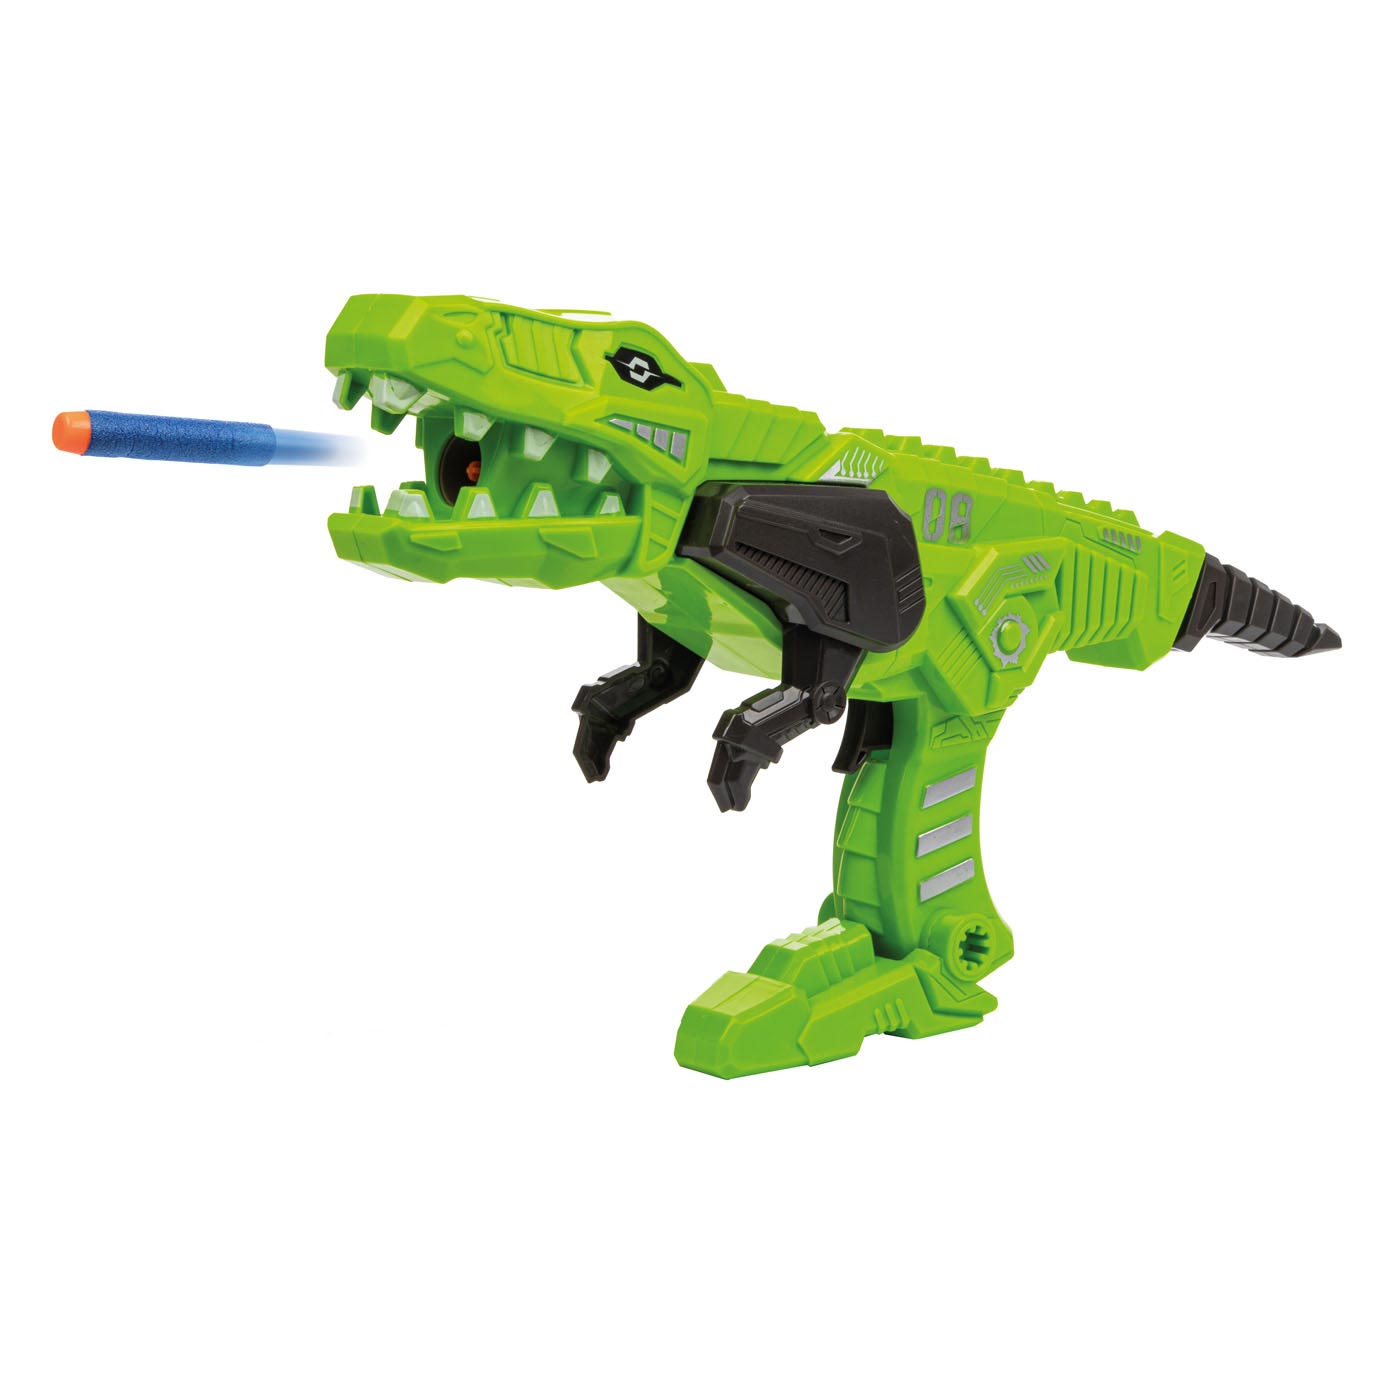 World of Dinosaurs Shooting Gun with Foam Arrows Thimble Toys